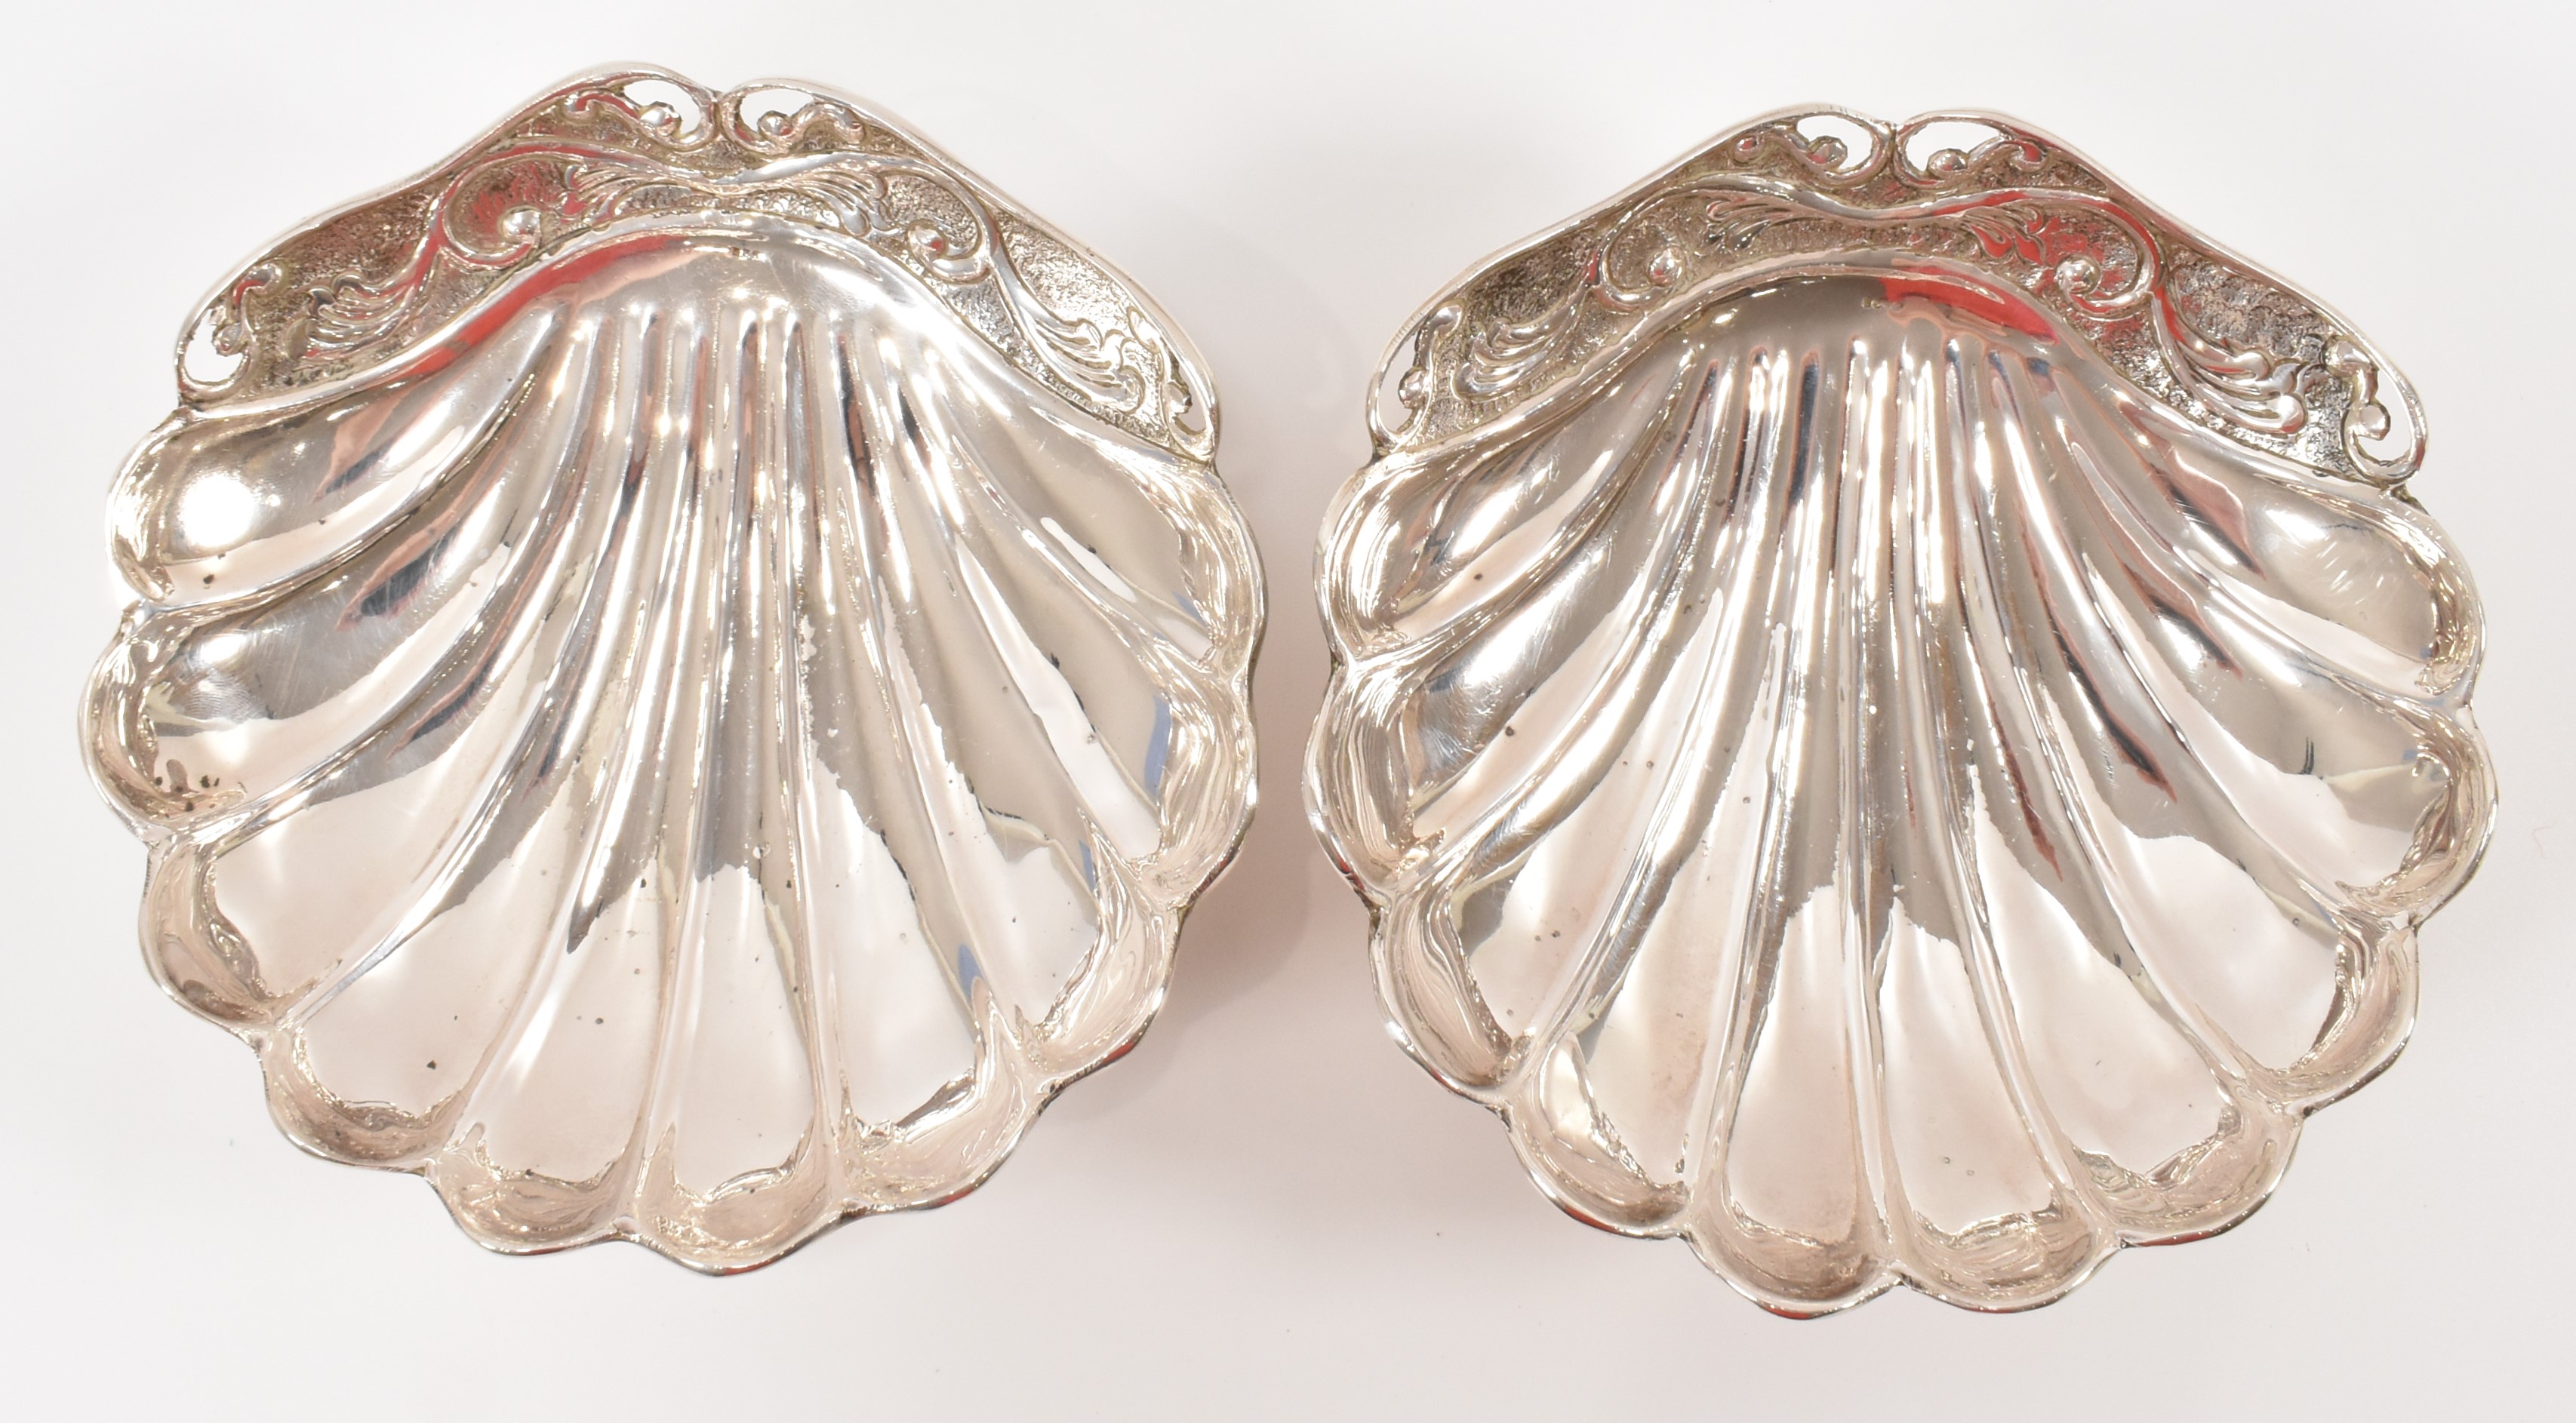 PAIR OF SILVER SCALLOP SHELL BOWLS - Image 5 of 7